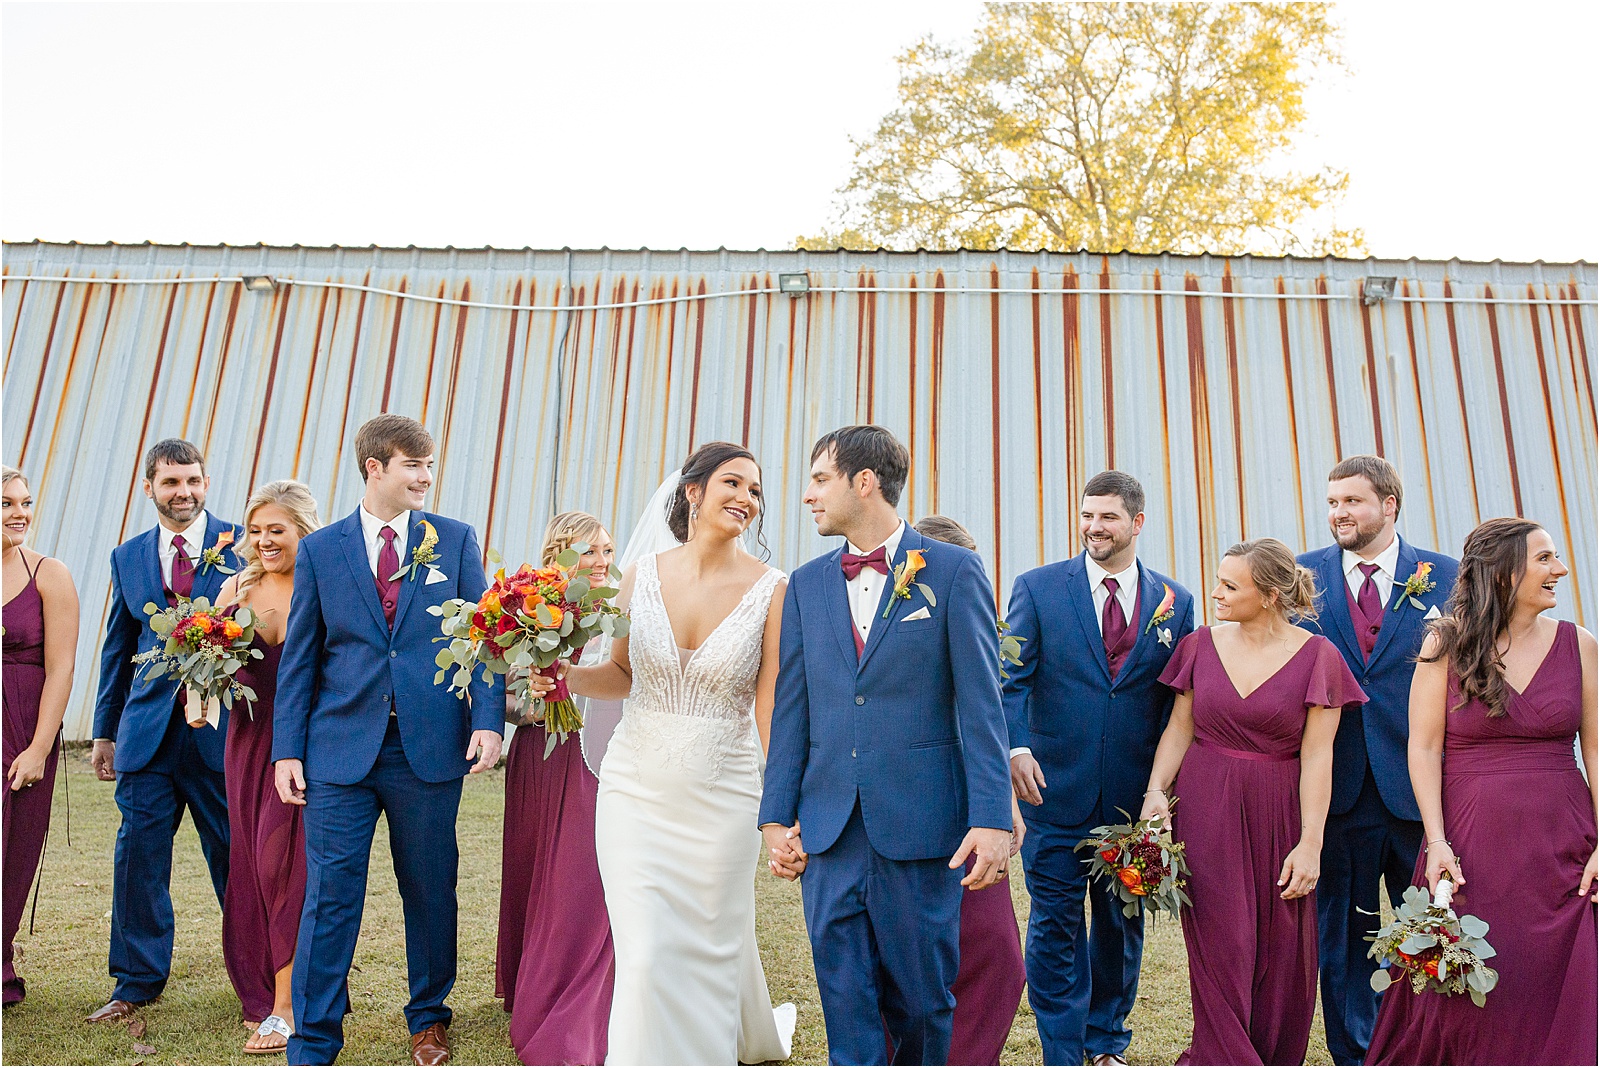 full bridal party walking towards camera with barn wedding venue in background